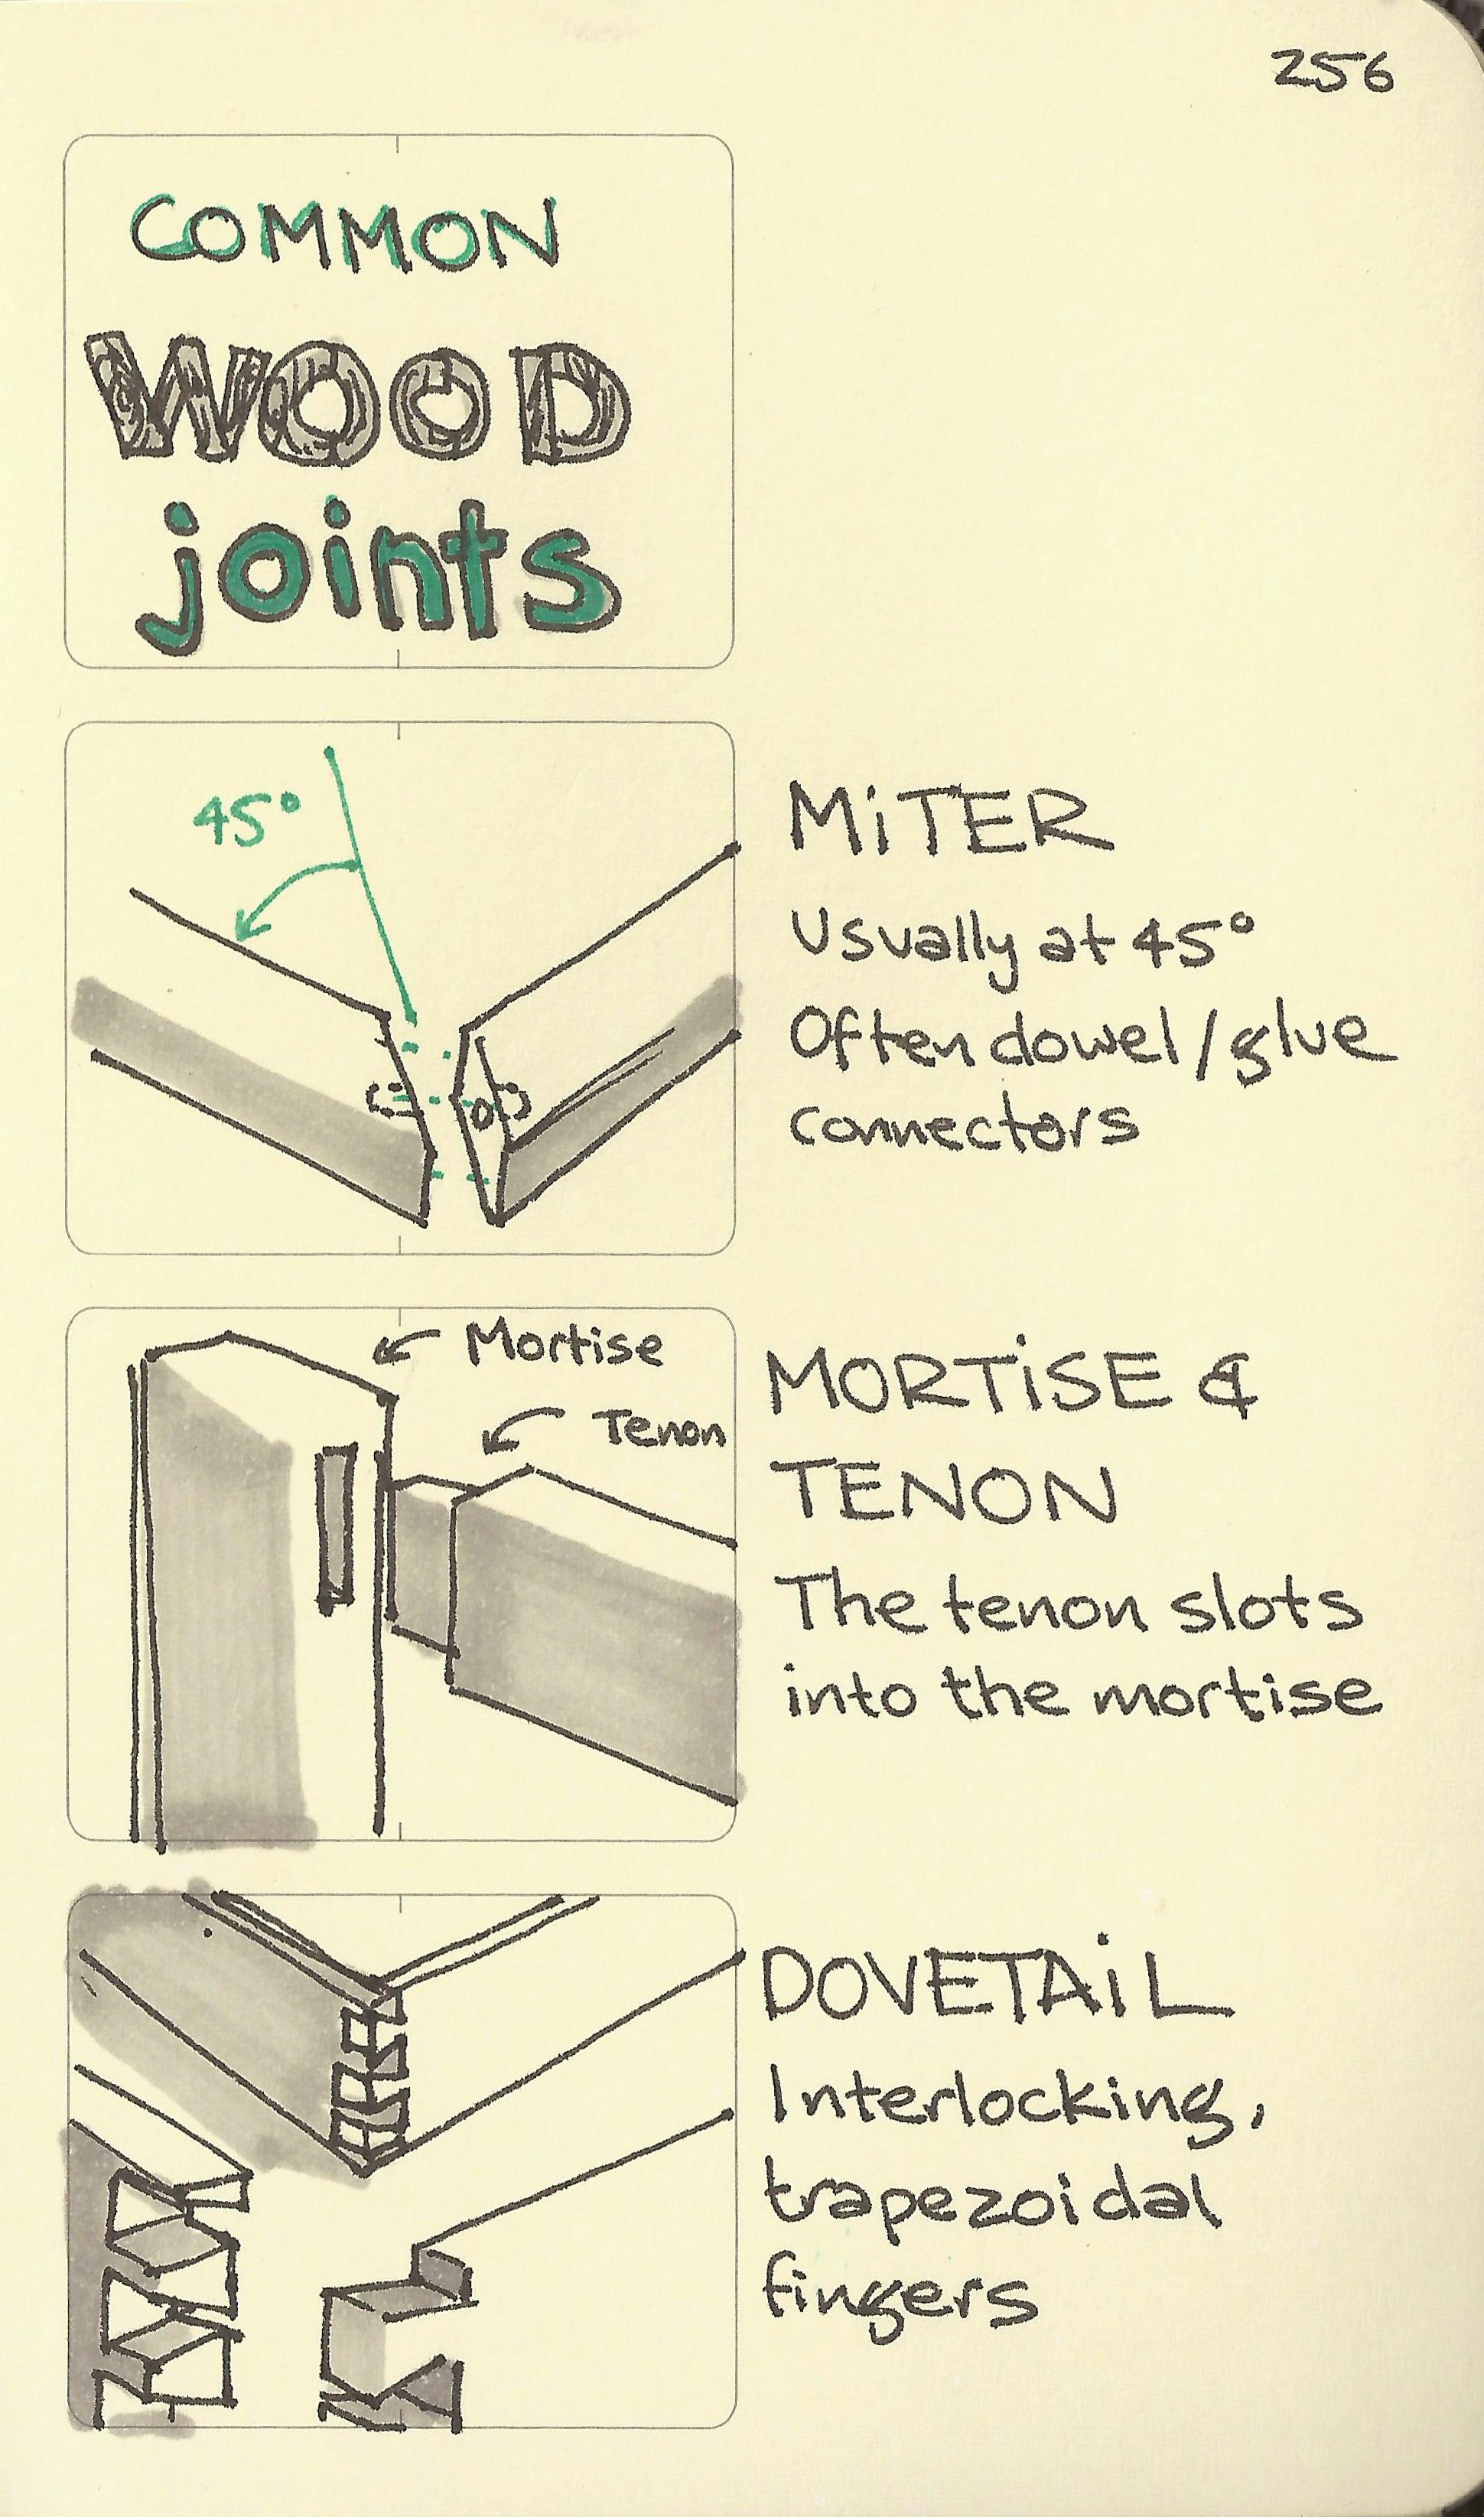 Common wood joints - Sketchplanations